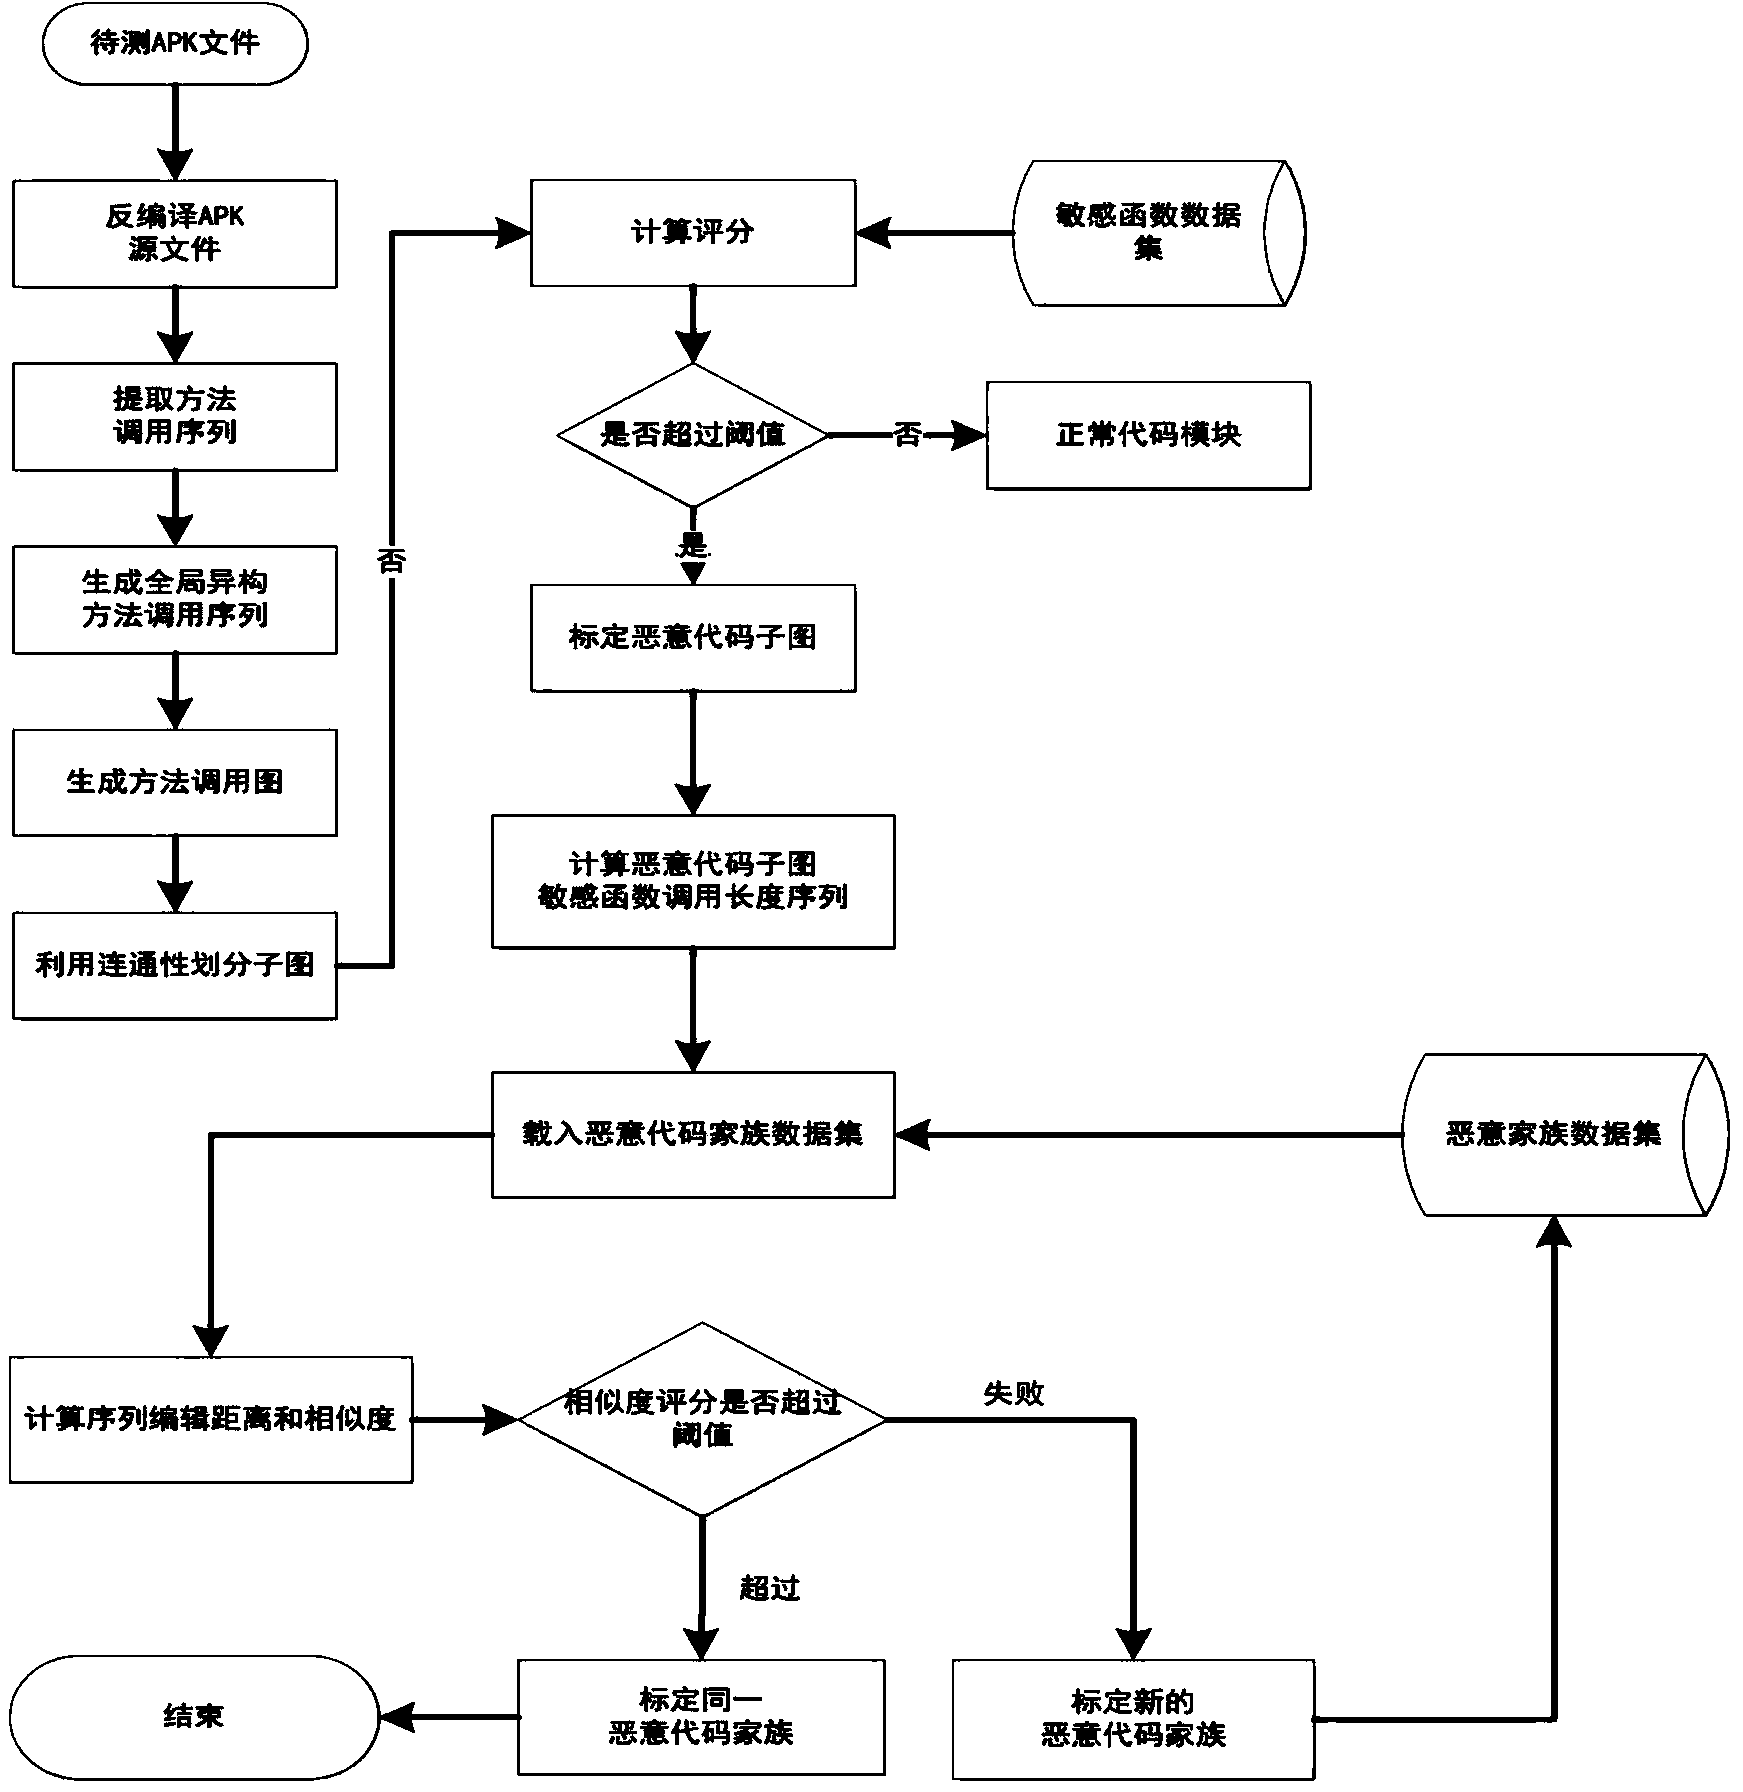 Android malicious software detection method based on method call graph